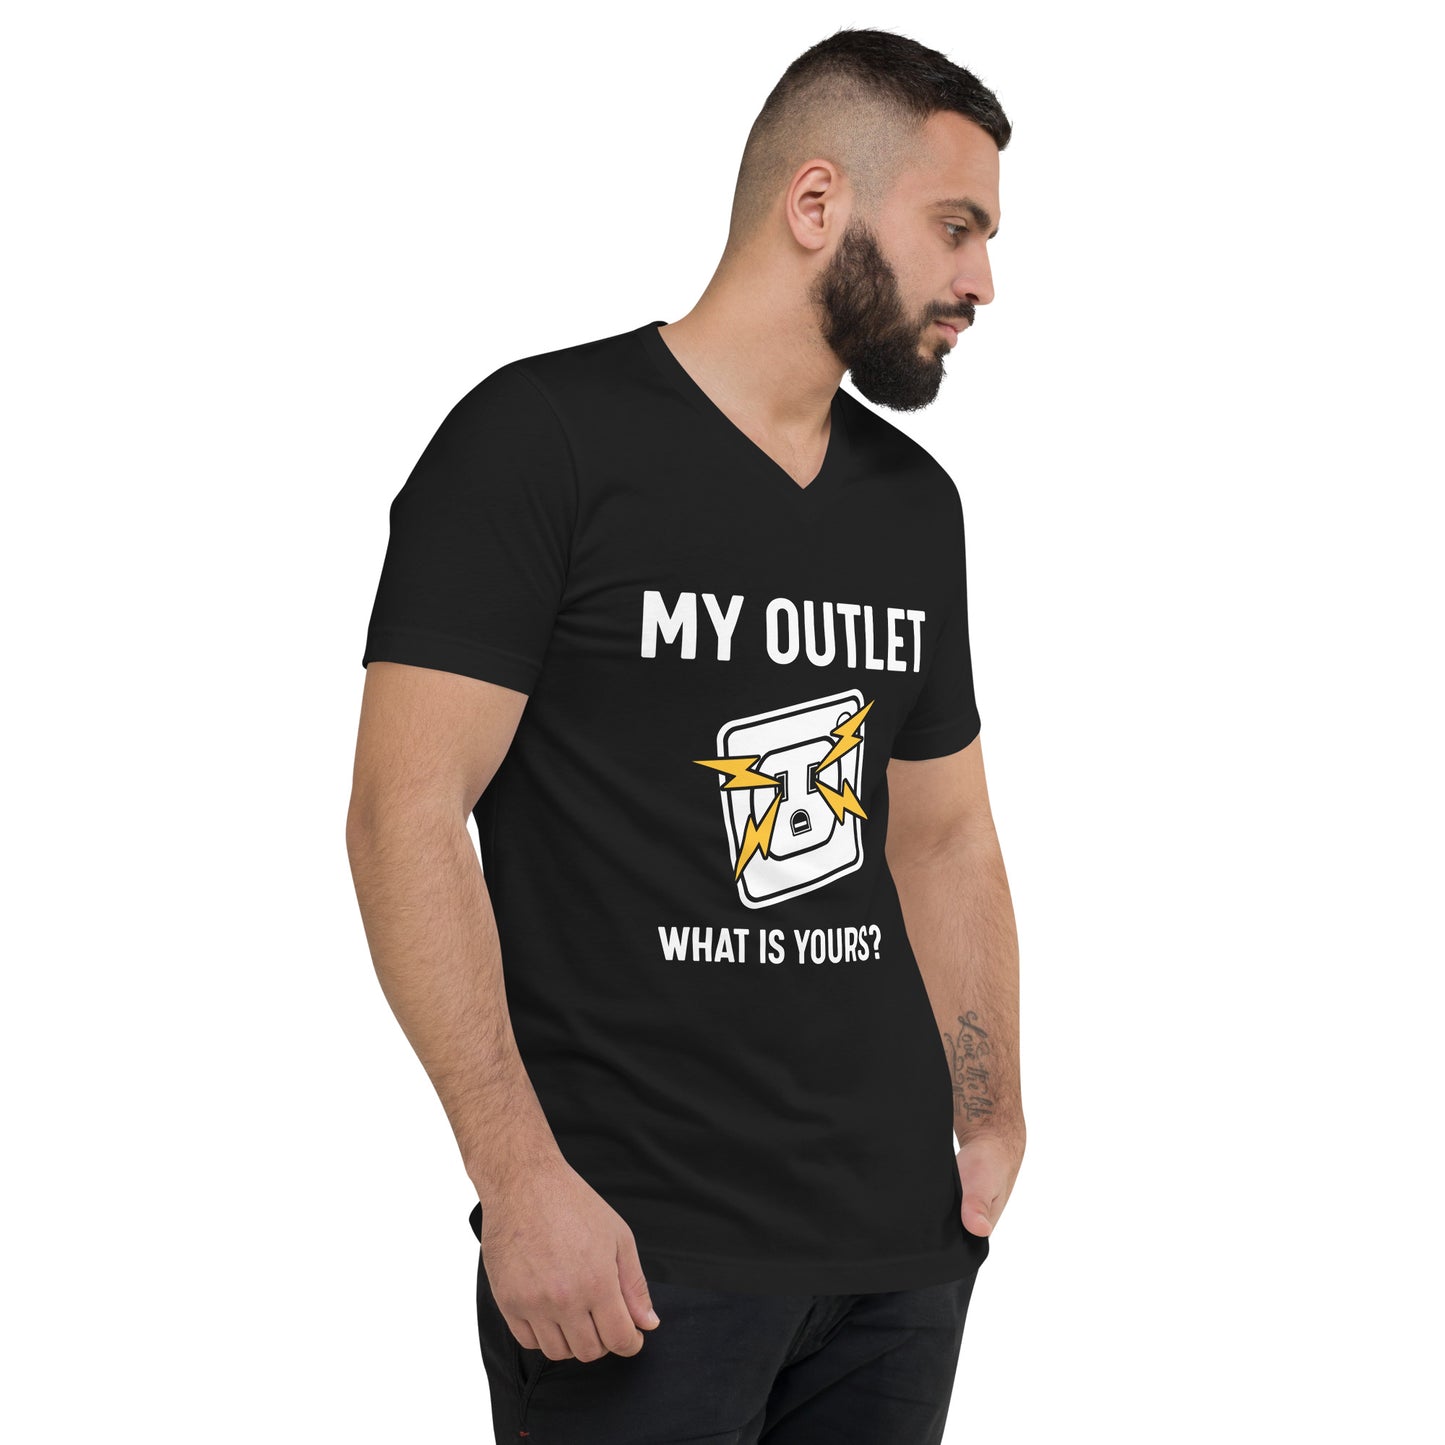 My Outlet What Is Yours ? Unisex Short Sleeve V-Neck T-Shirt